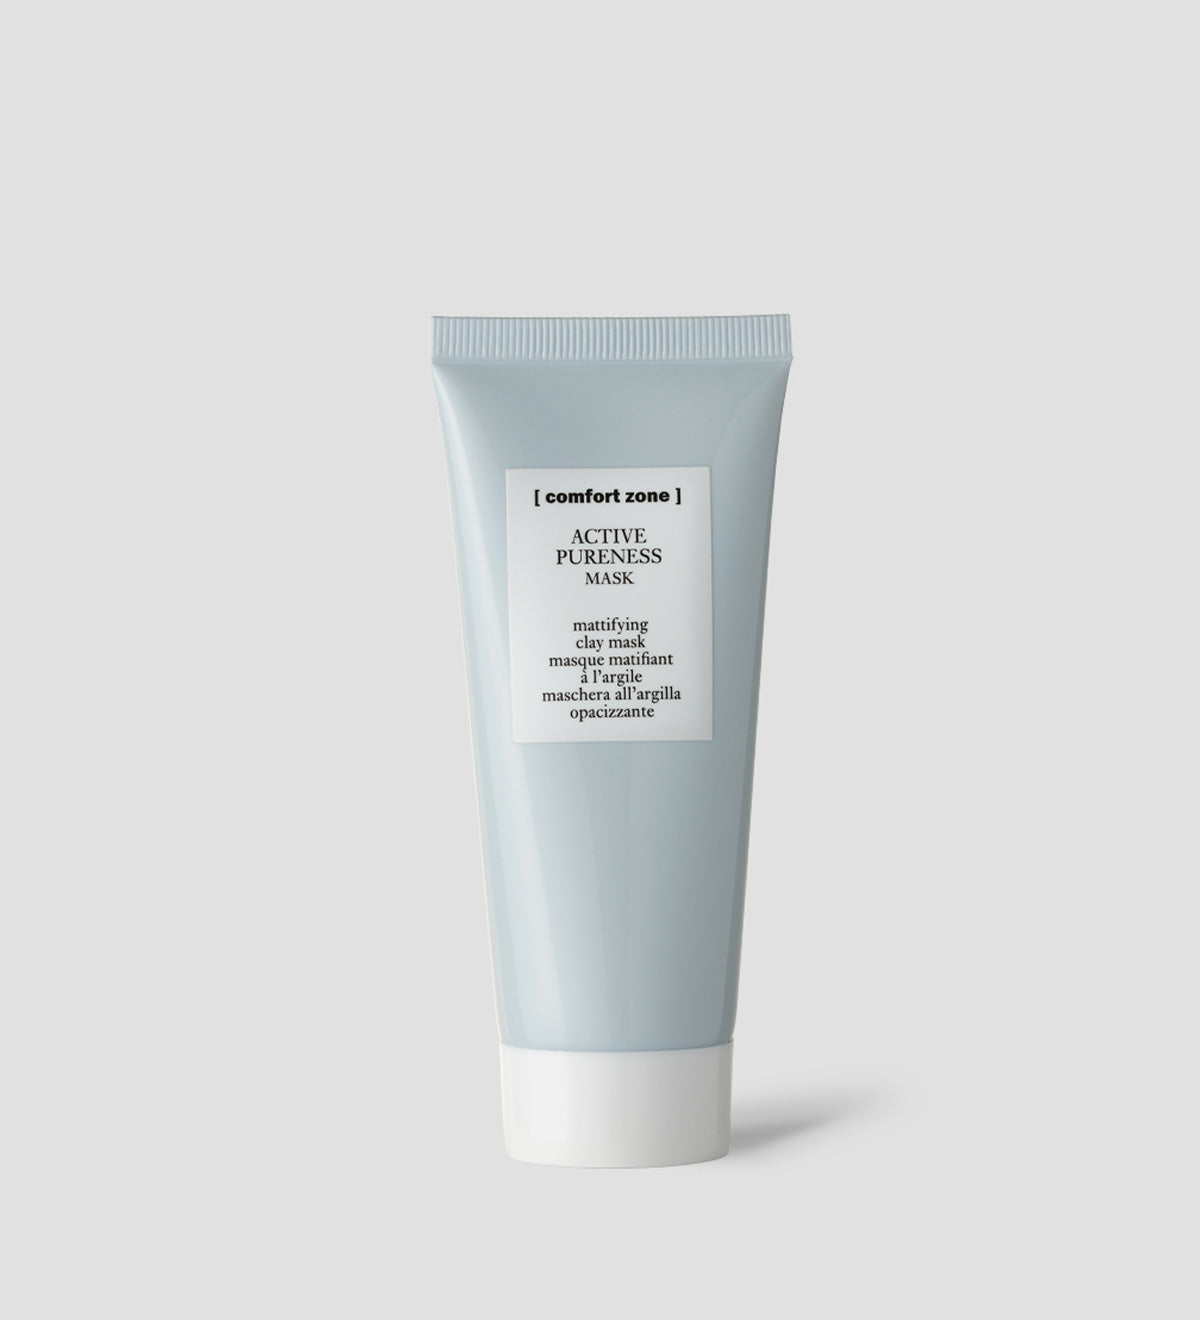 Comfort Zone: ACTIVE PURENESS MASK Mattifying clay mask-